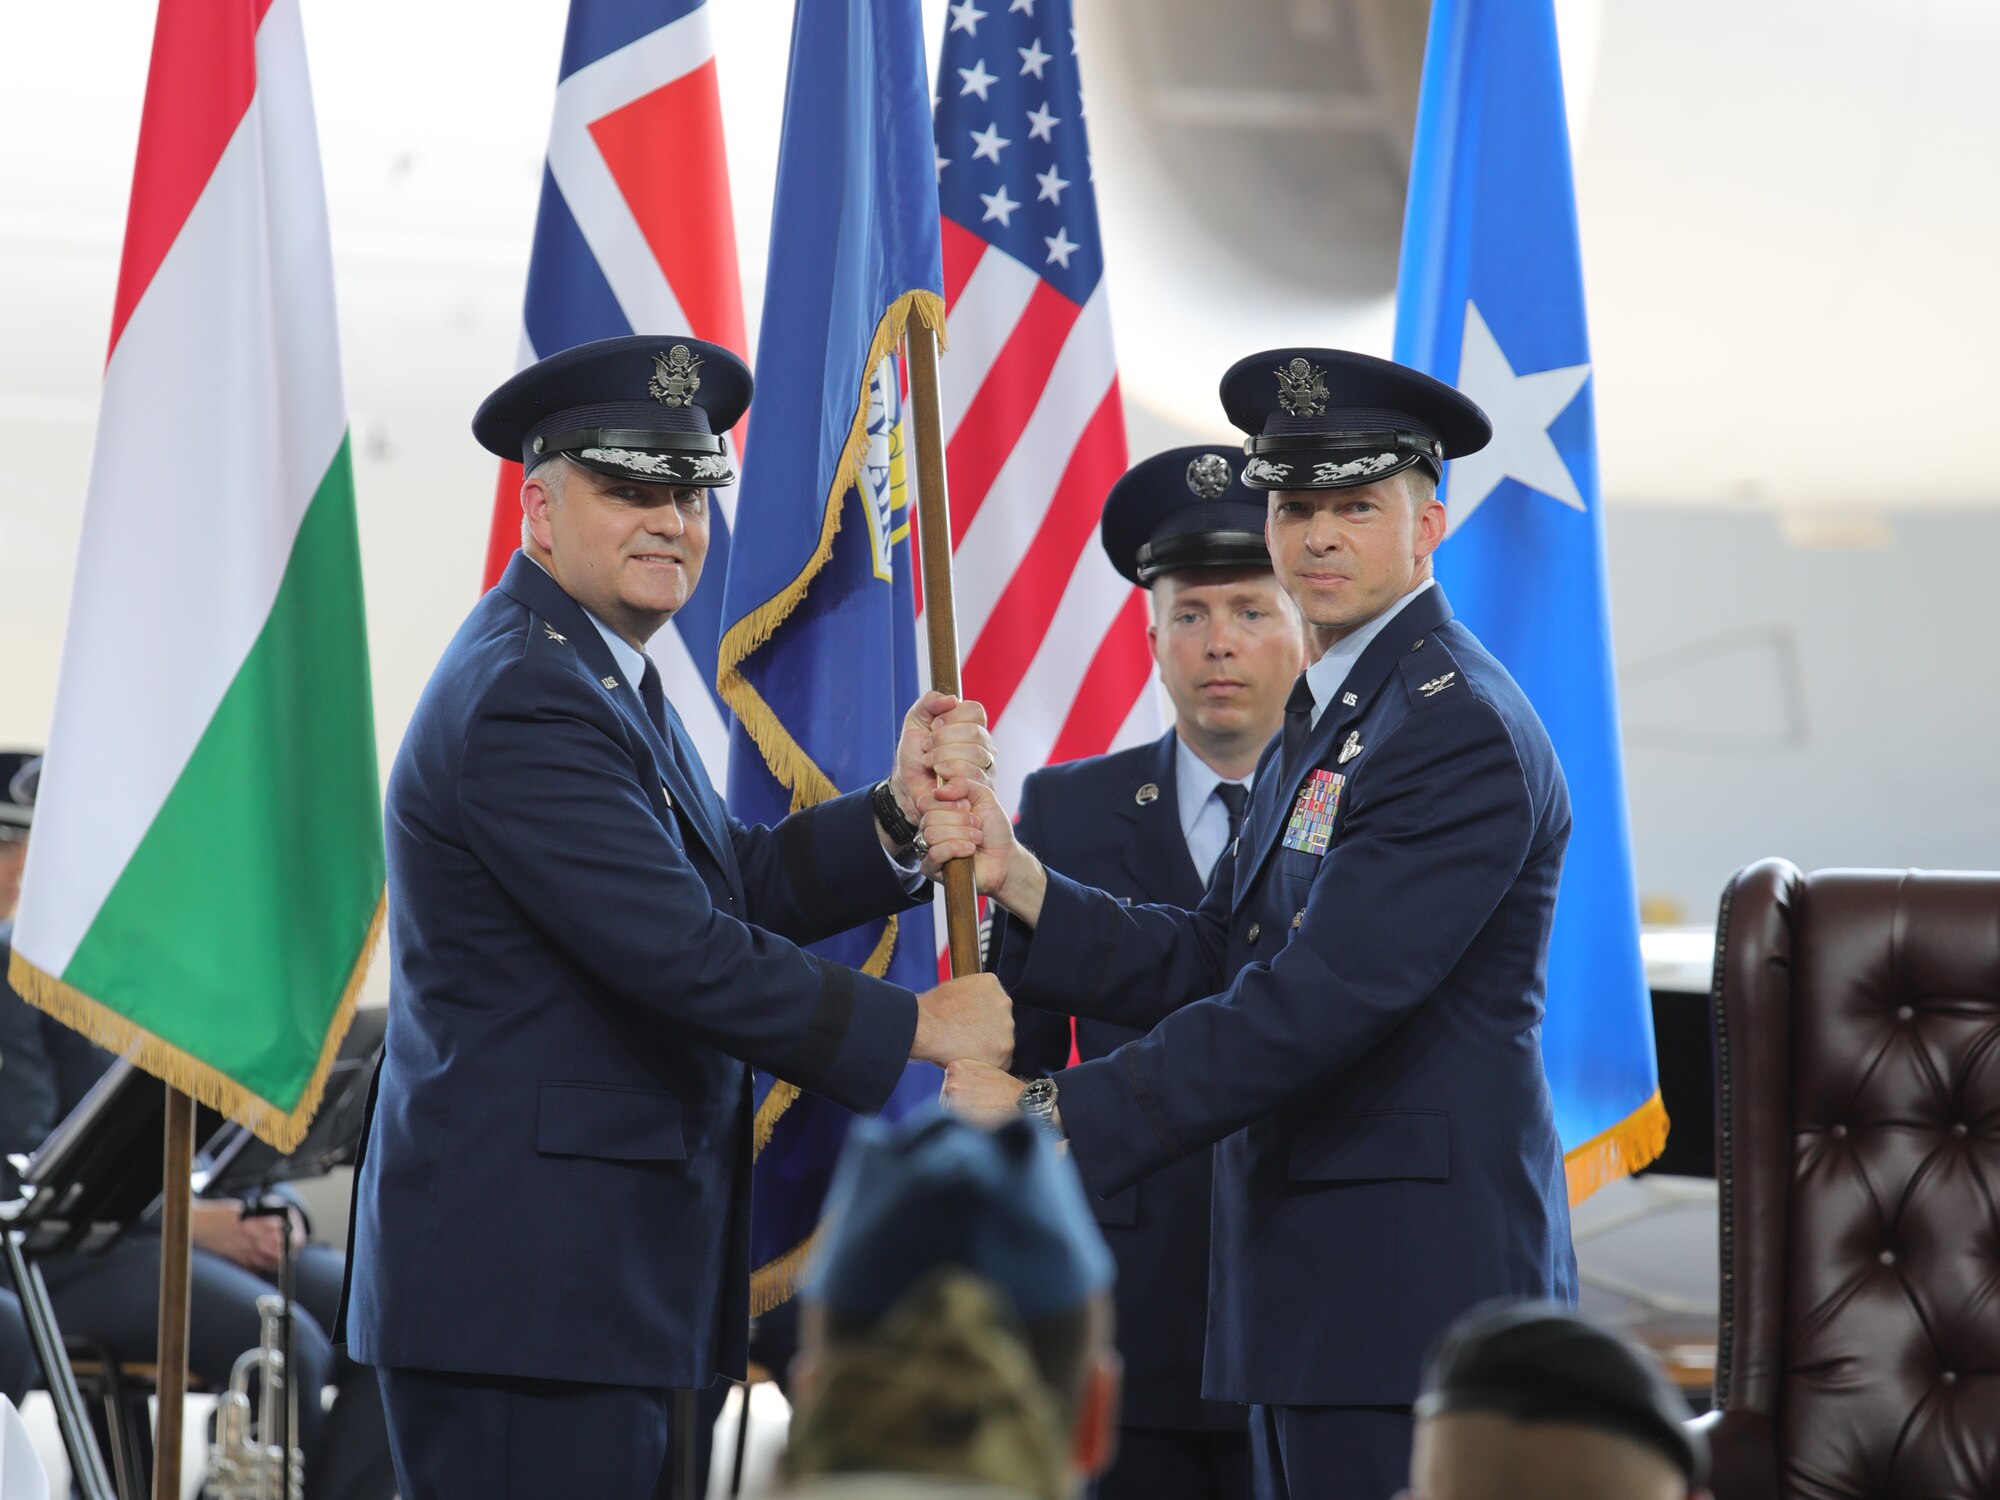 U.S. Air Force Col. James S. Sparrow assumed command of the Heavy Airlift Wing.